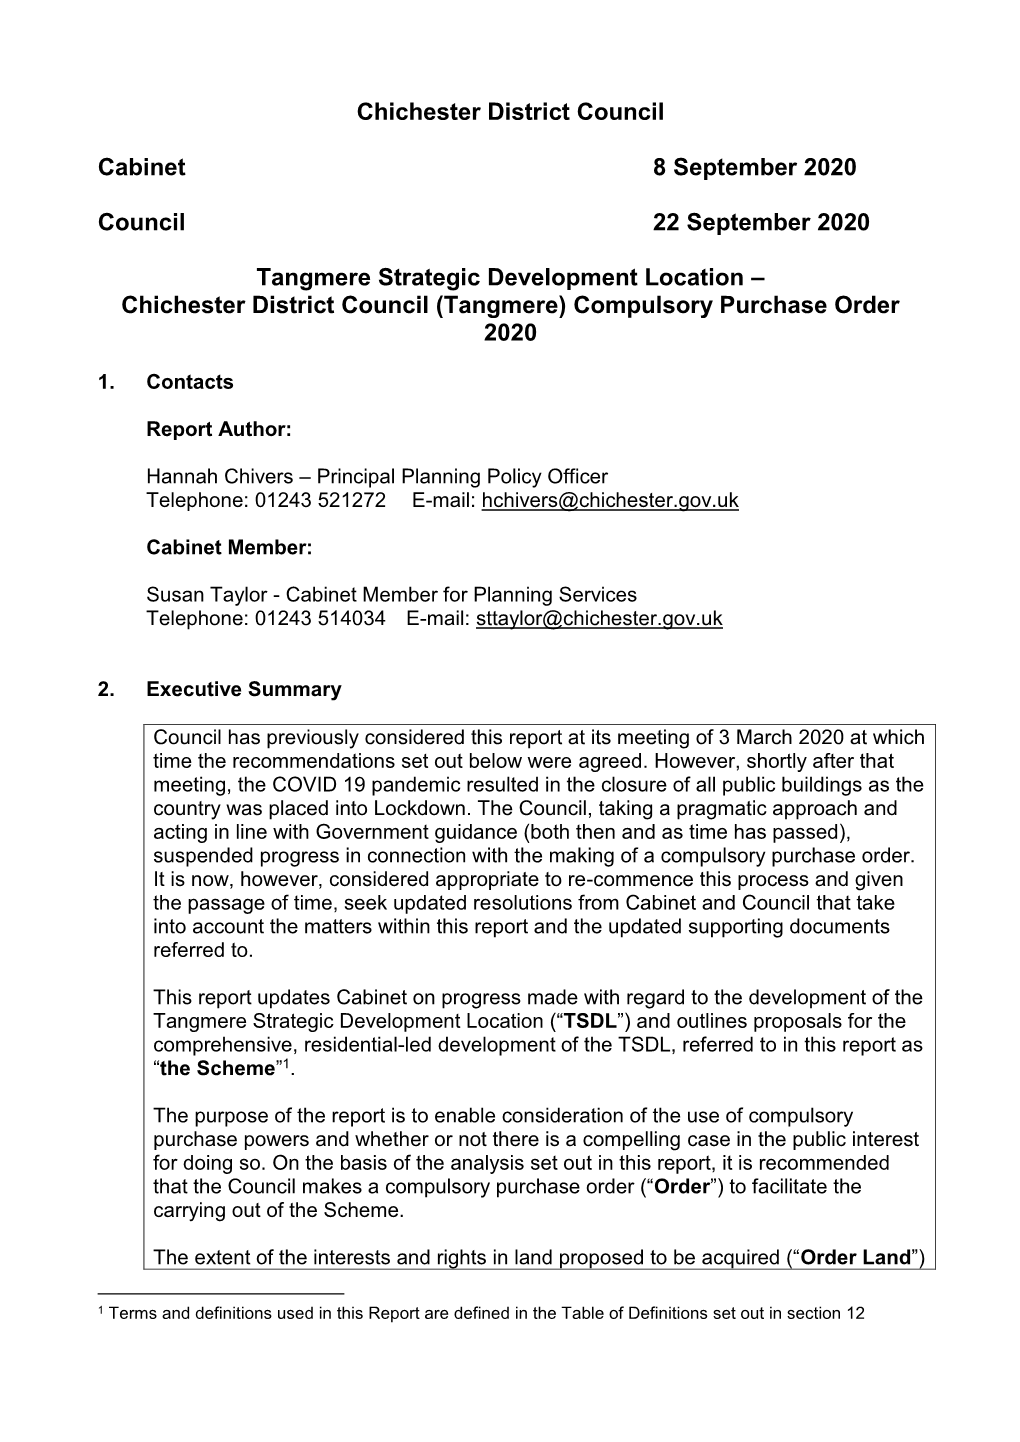 Chichester District Council (Tangmere) Compulsory Purchase Order 2020